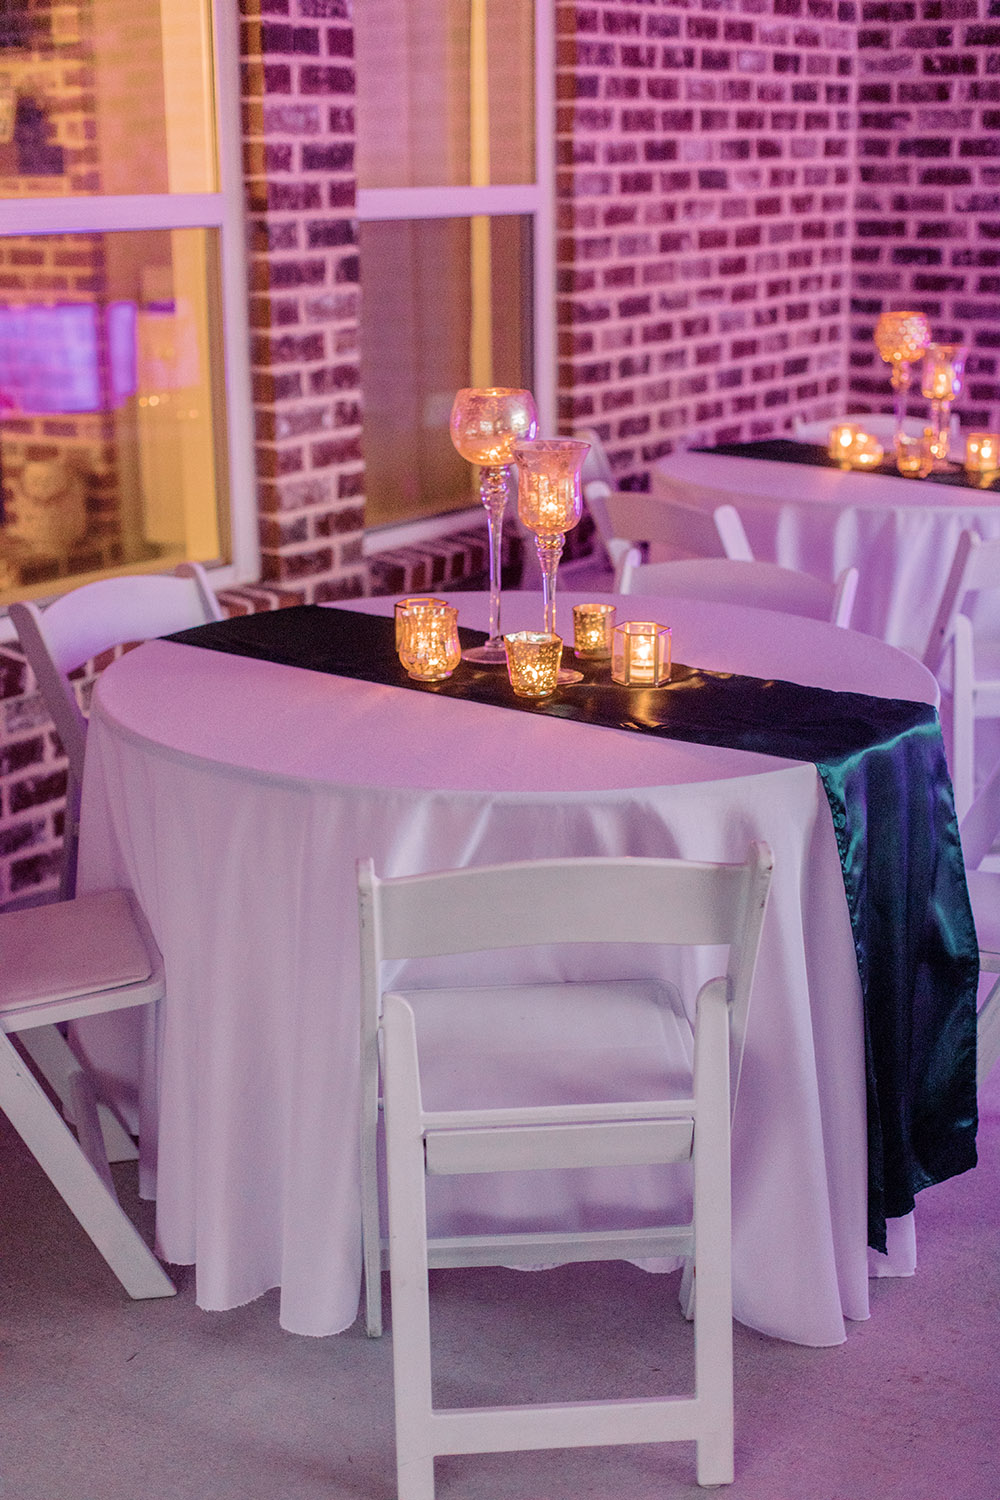 Reception tables with emerald satin runners and candles. Photo: Ashley Kristen Photography